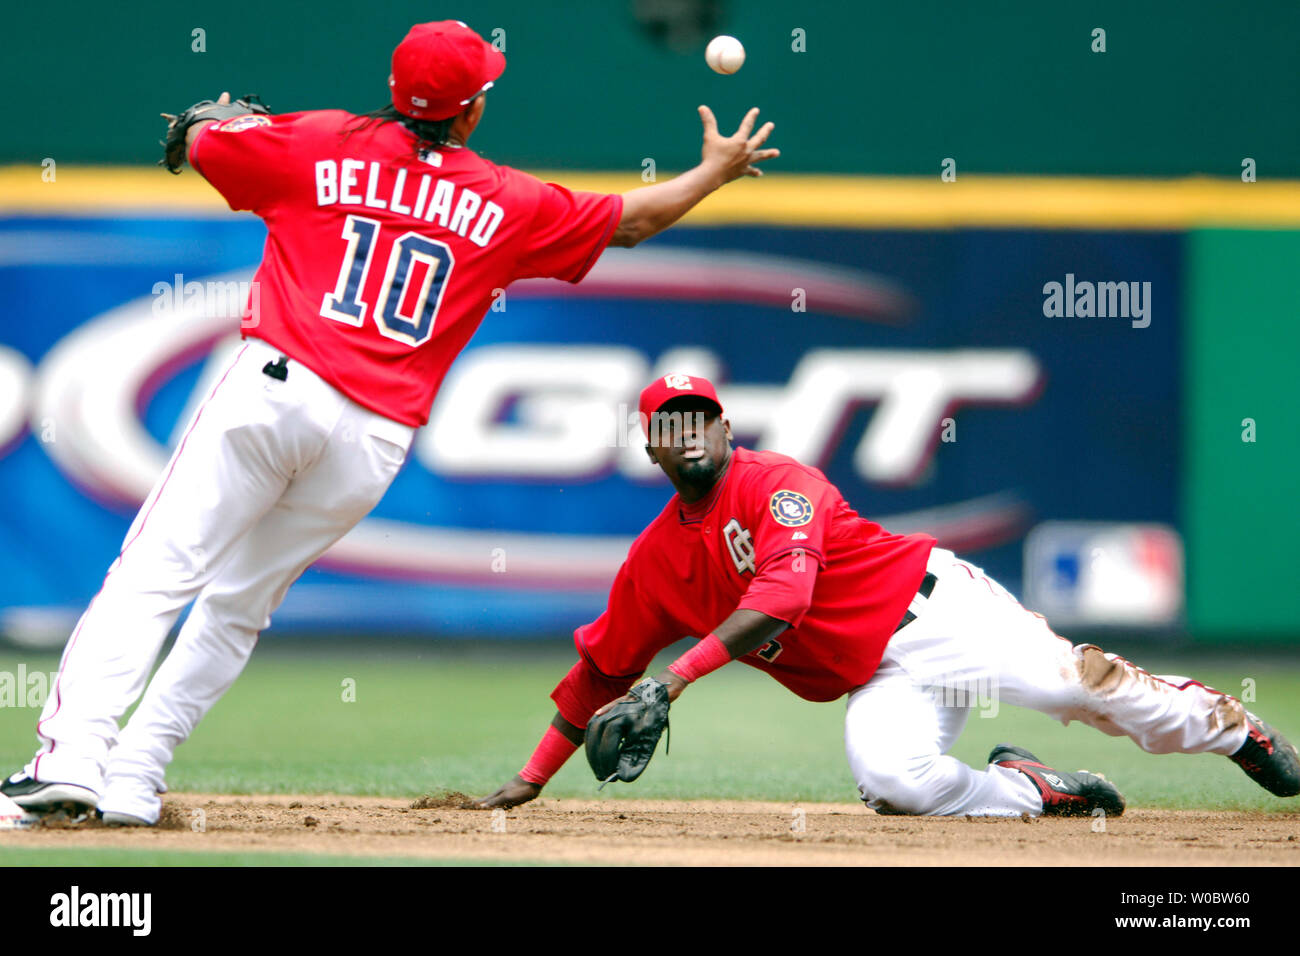 Washington Nationals shortstop Cristian Guzman (R) tosses the ball to second baseman Ronnie Belliard (10) to force out designated hitter Travis Hafner in the second inning on June 24, 2007 at RFK Stadium in Washington.  The Nationals defeated the Indians 3-1.  (UPI Photo/Mark Goldman) Stock Photo